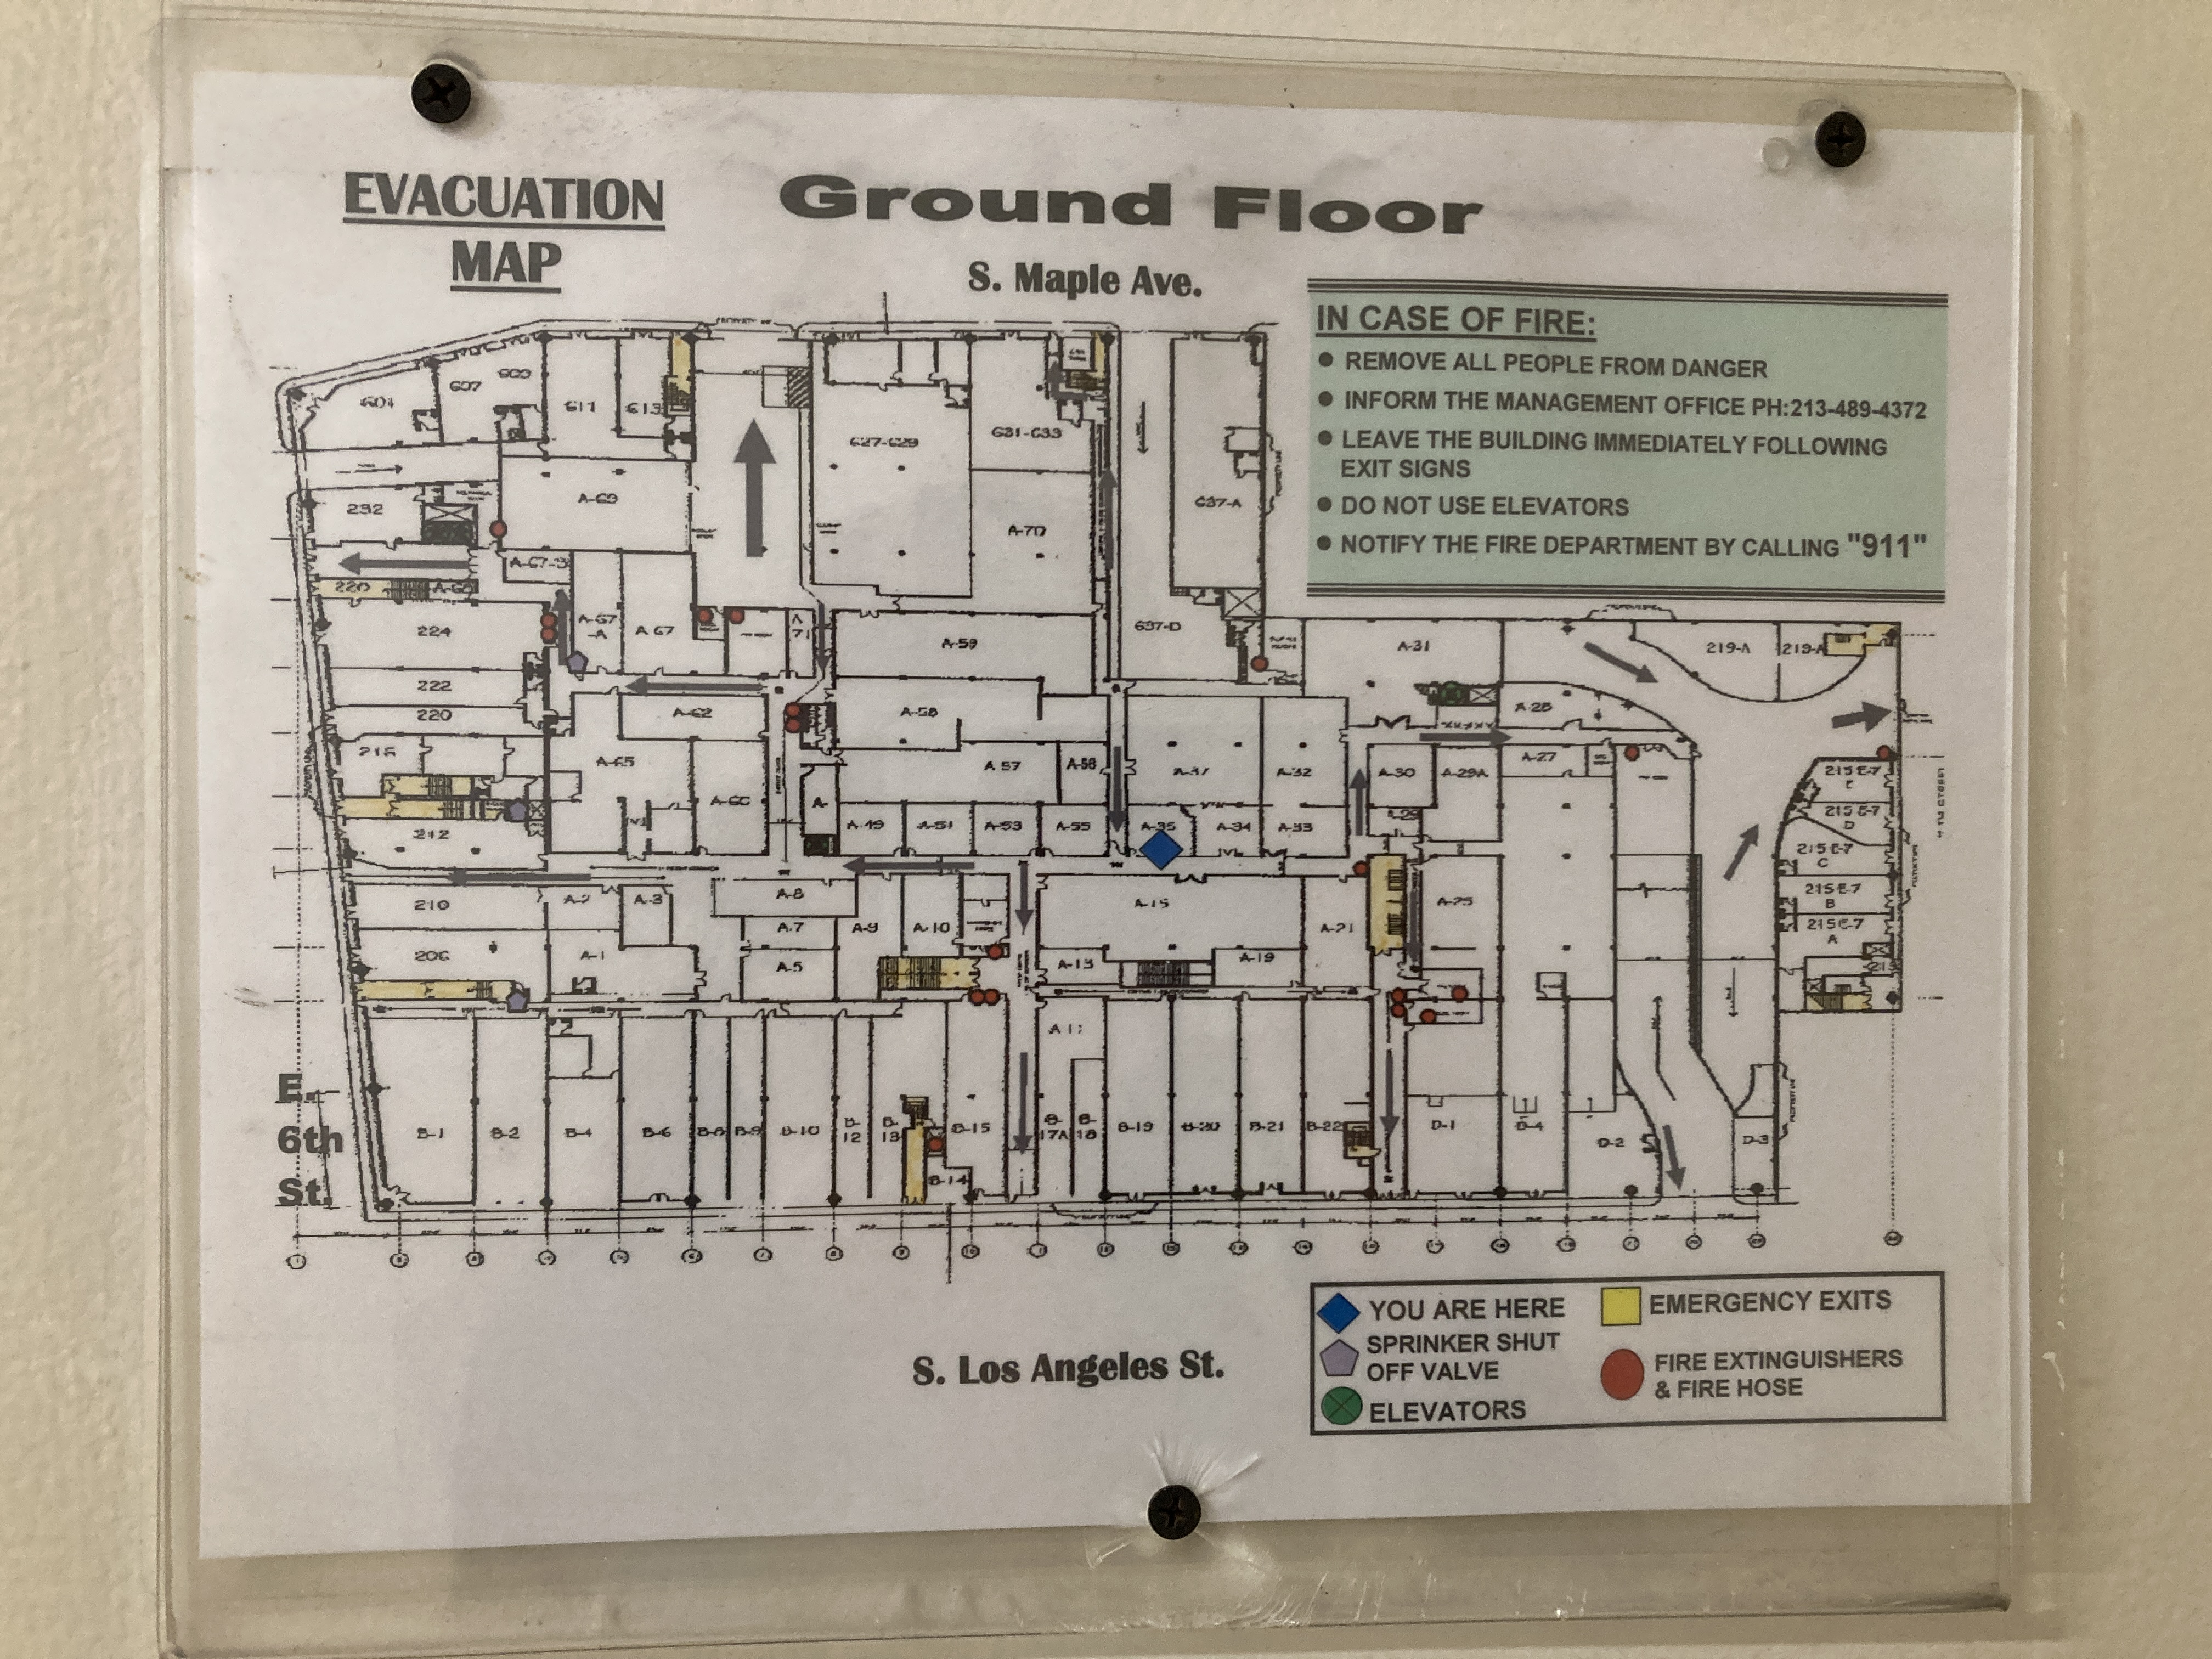 an interior hallway. printed fire evacuation map of the building. There are so many hallways and rooms, i'm not even sure how to describe the map